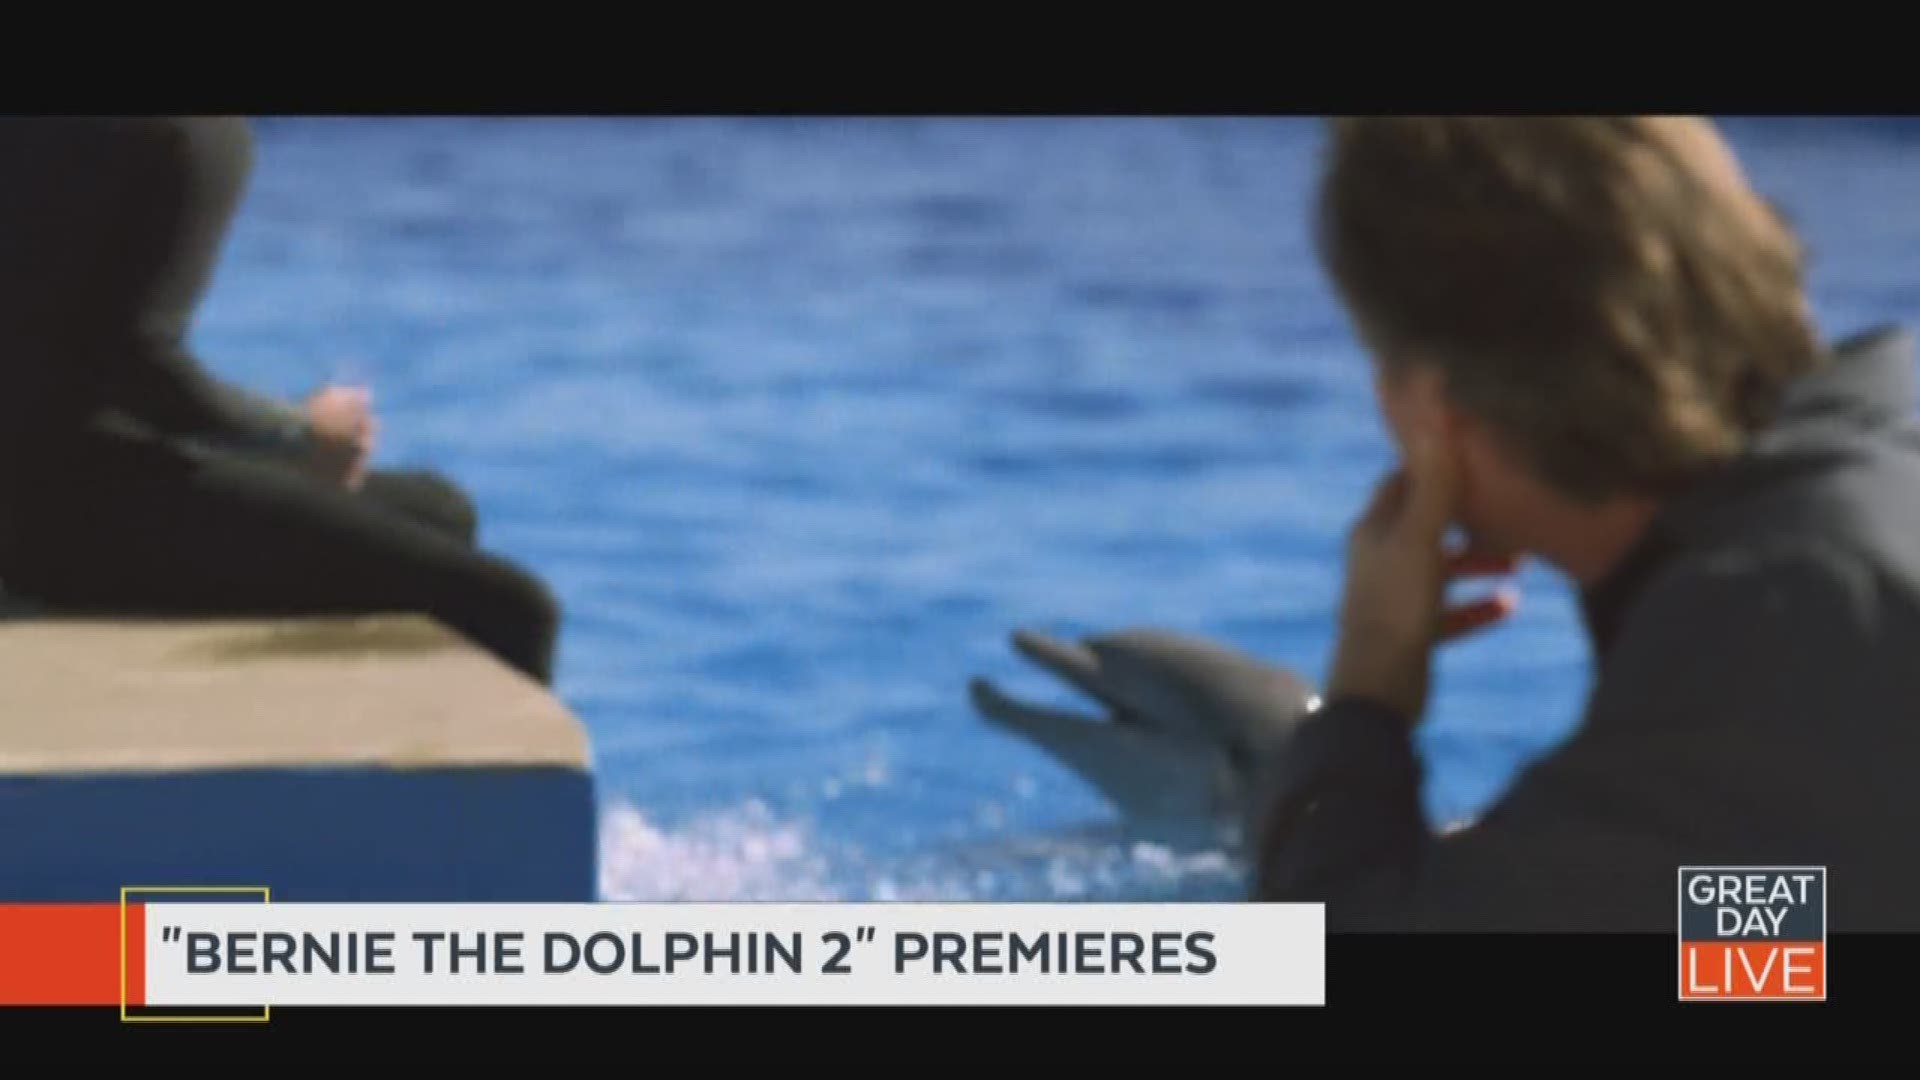 You can see Bernie the Dolphin 2 on demand.